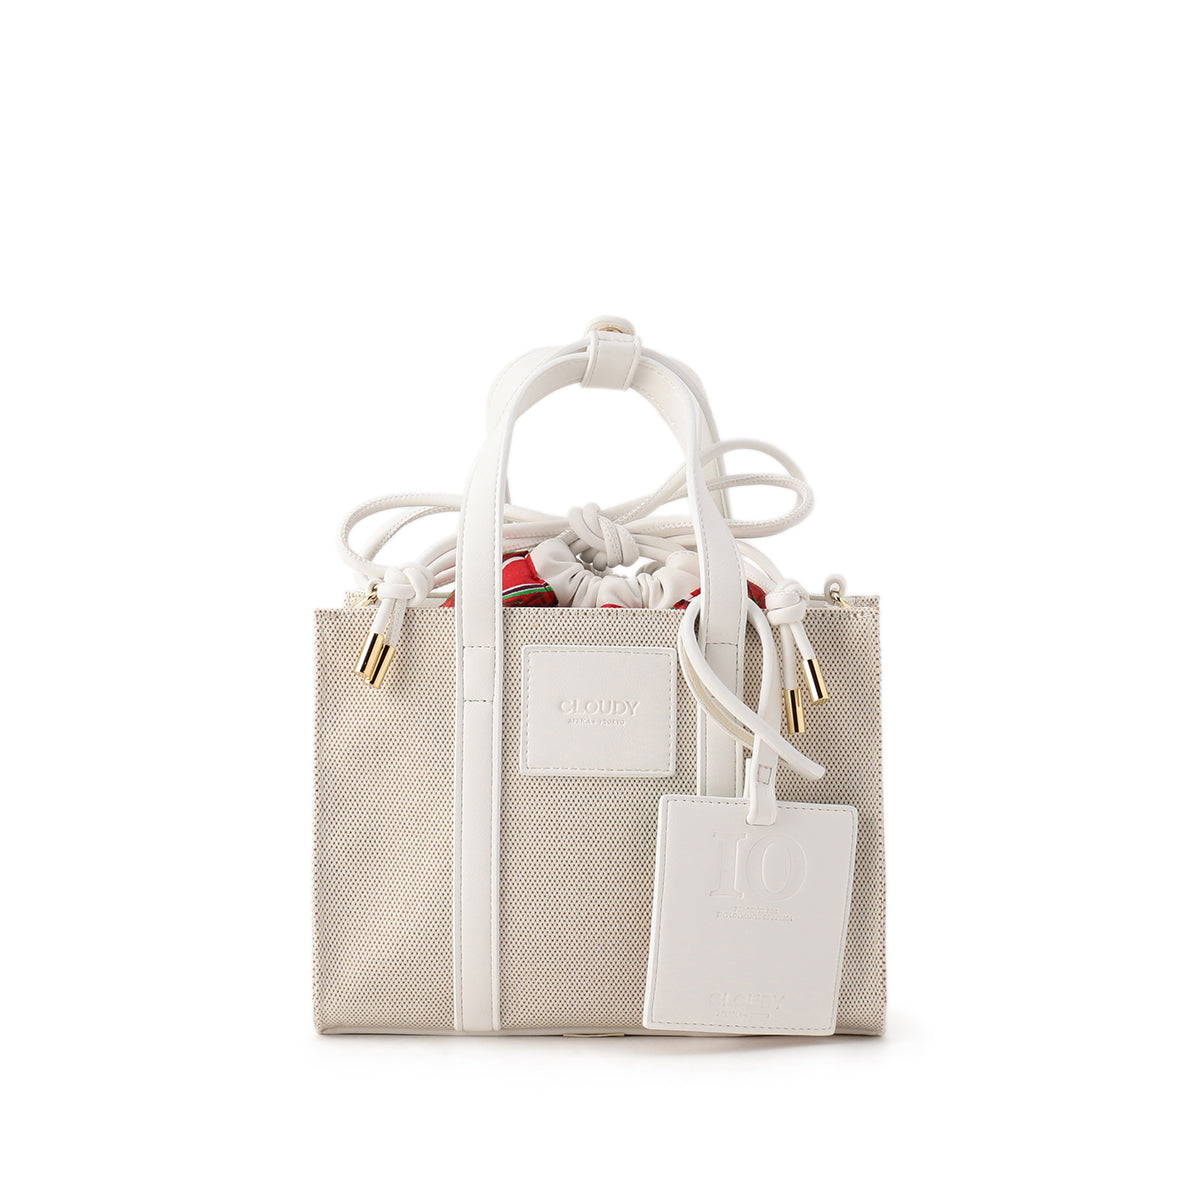 Square canvas tote Small WHITE | バッグ | CLOUDY公式通販サイト